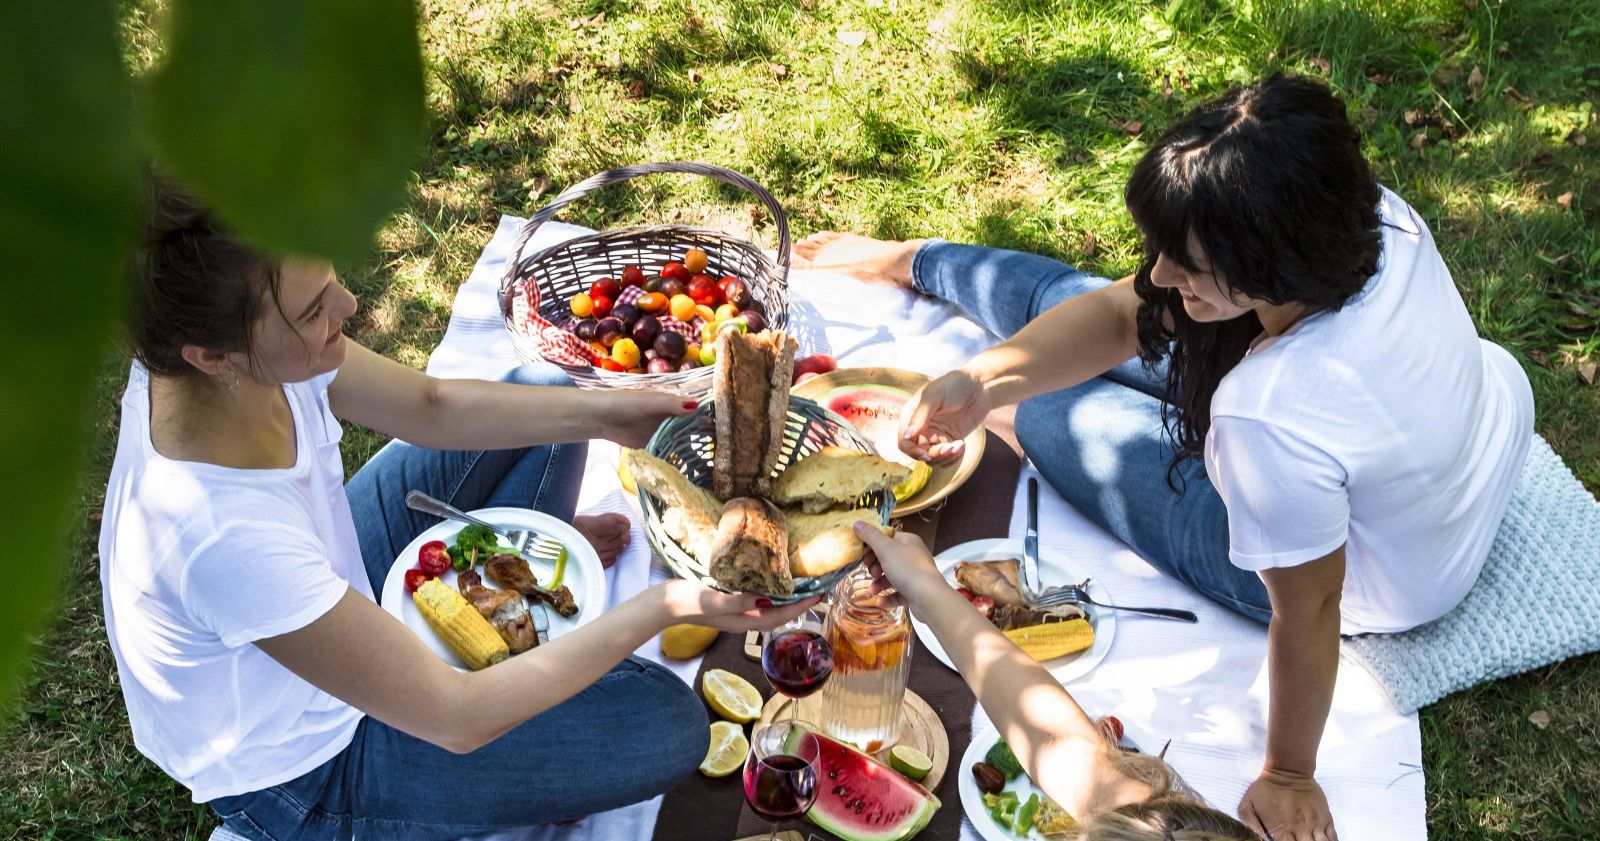 Summer picnic with friends in nature with food and 2023 11 27 05 22 51 utc